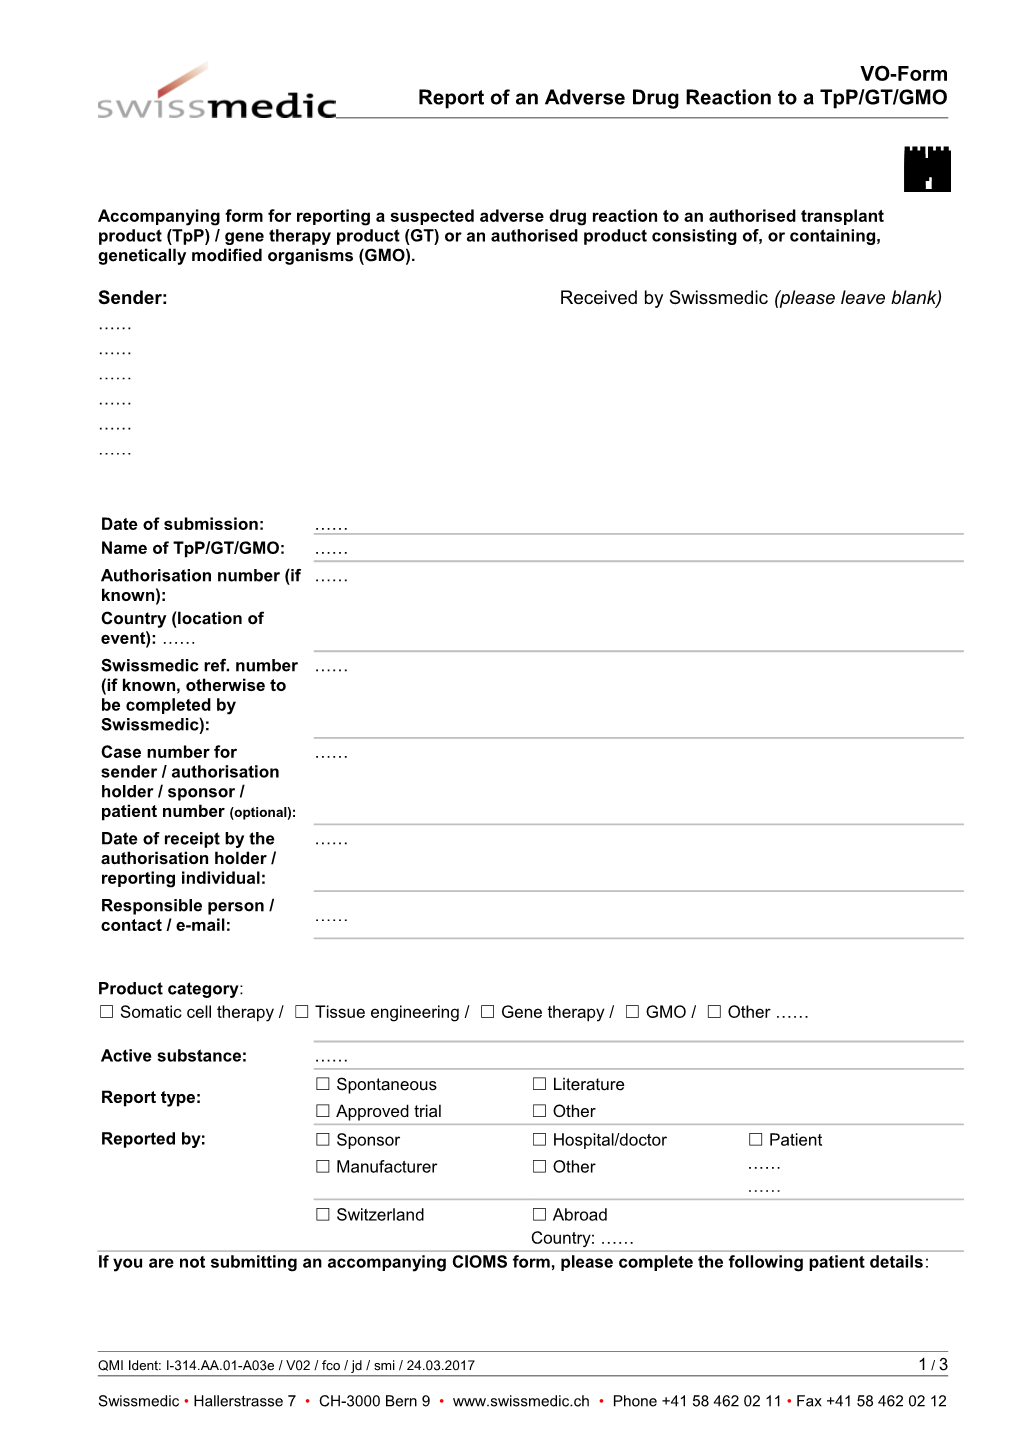 I-314.AA.01-A03e Form Report of an Adverse Drug Reaction to a Tpp/GT/GMO